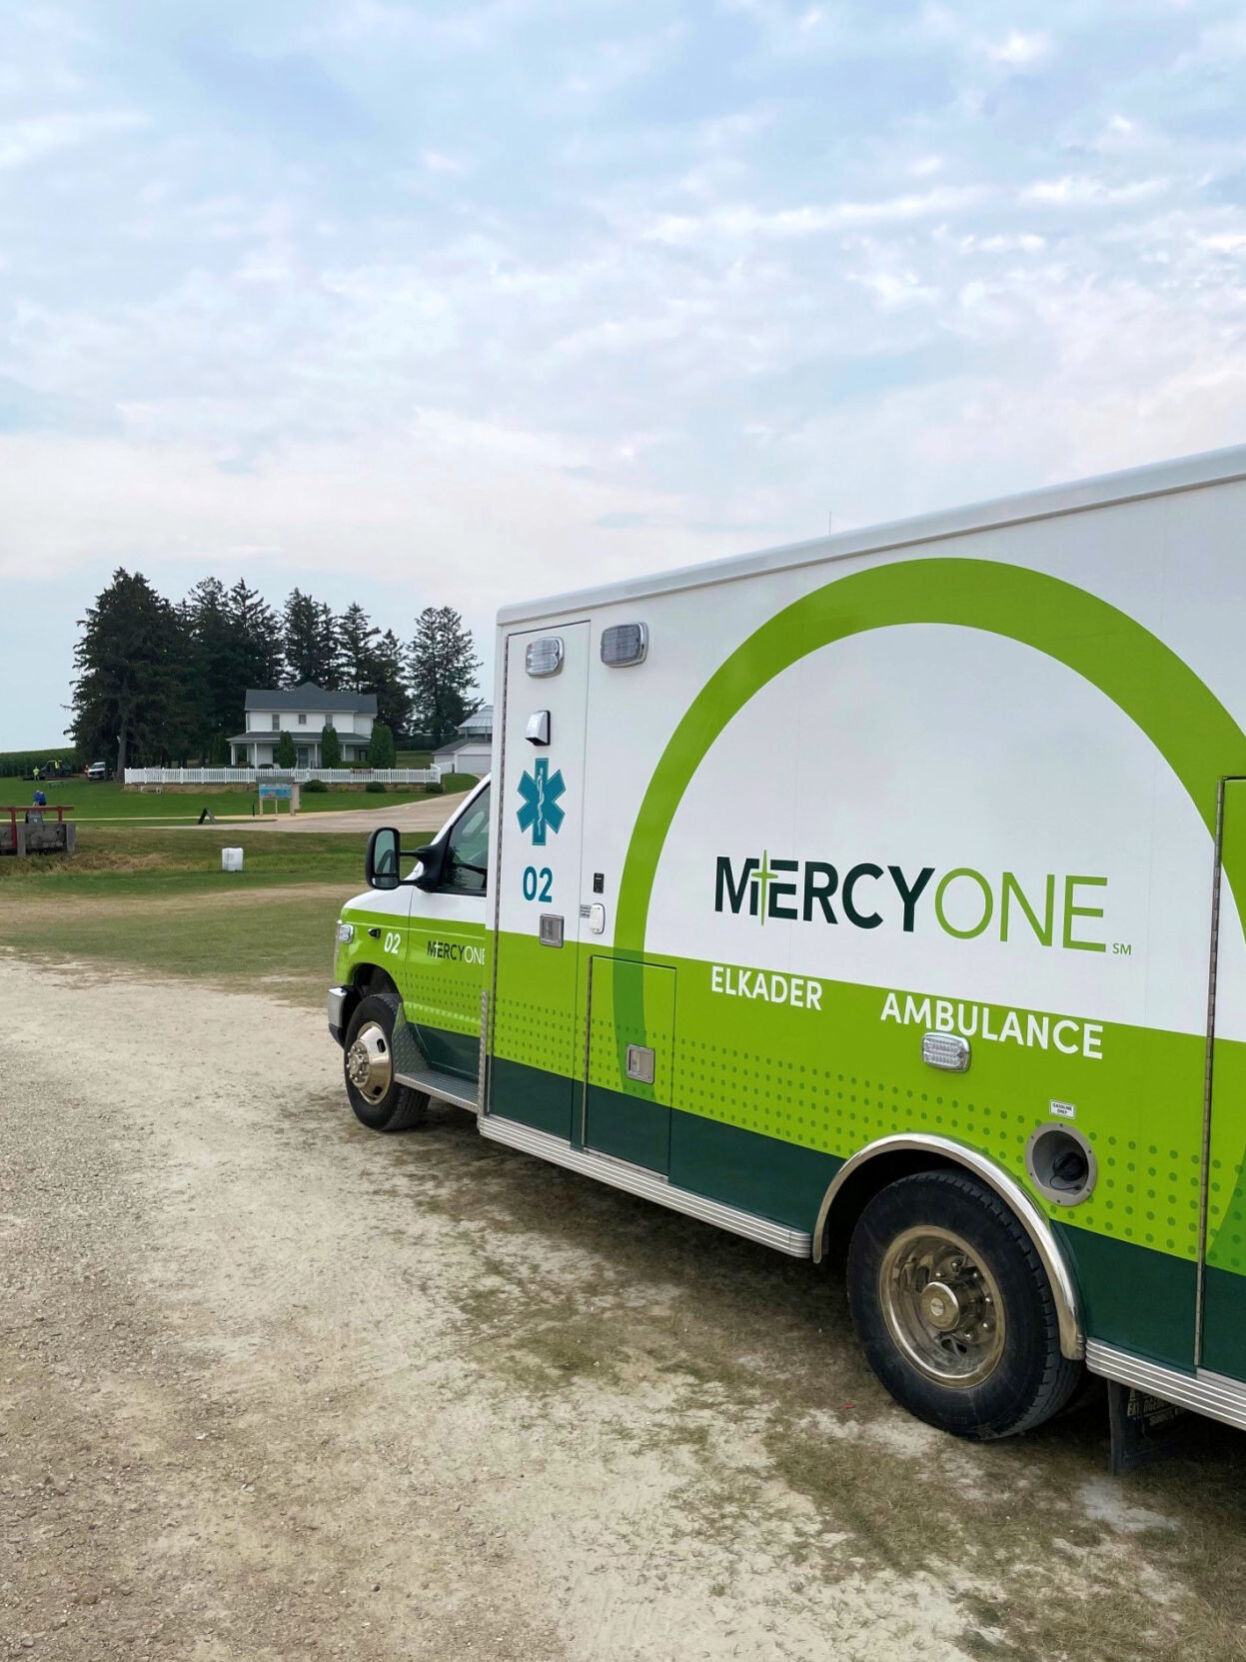 MercyOne staffers provided medical services at Field of Dreams from Aug. 5 through Aug. 14, with about 30 MercyOne reps on the site on the day of the game.    PHOTO CREDIT: Contributed